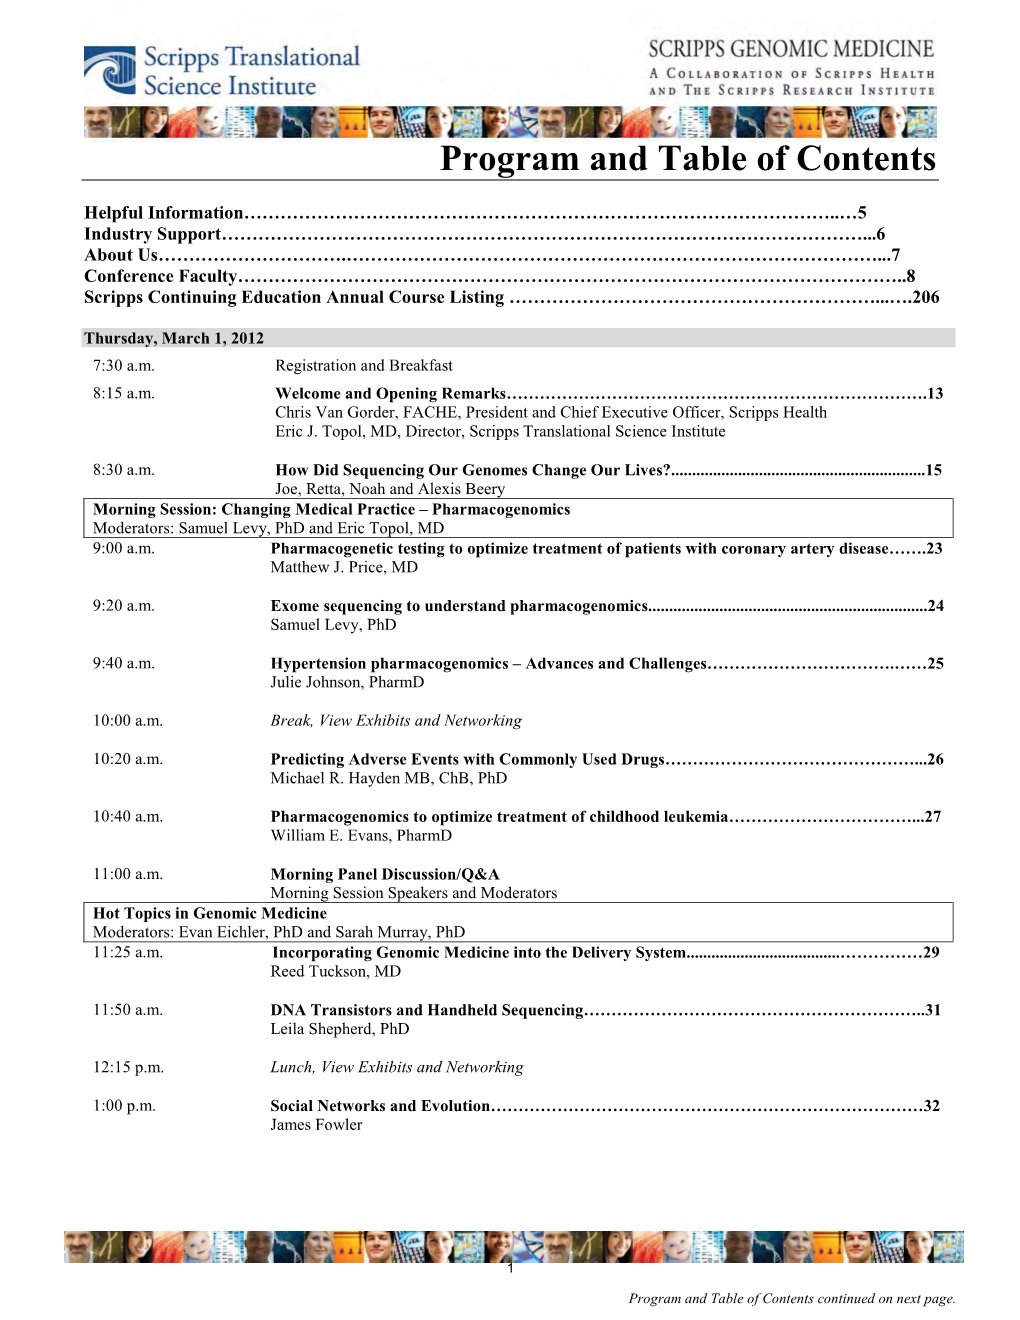 Program and Table of Contents